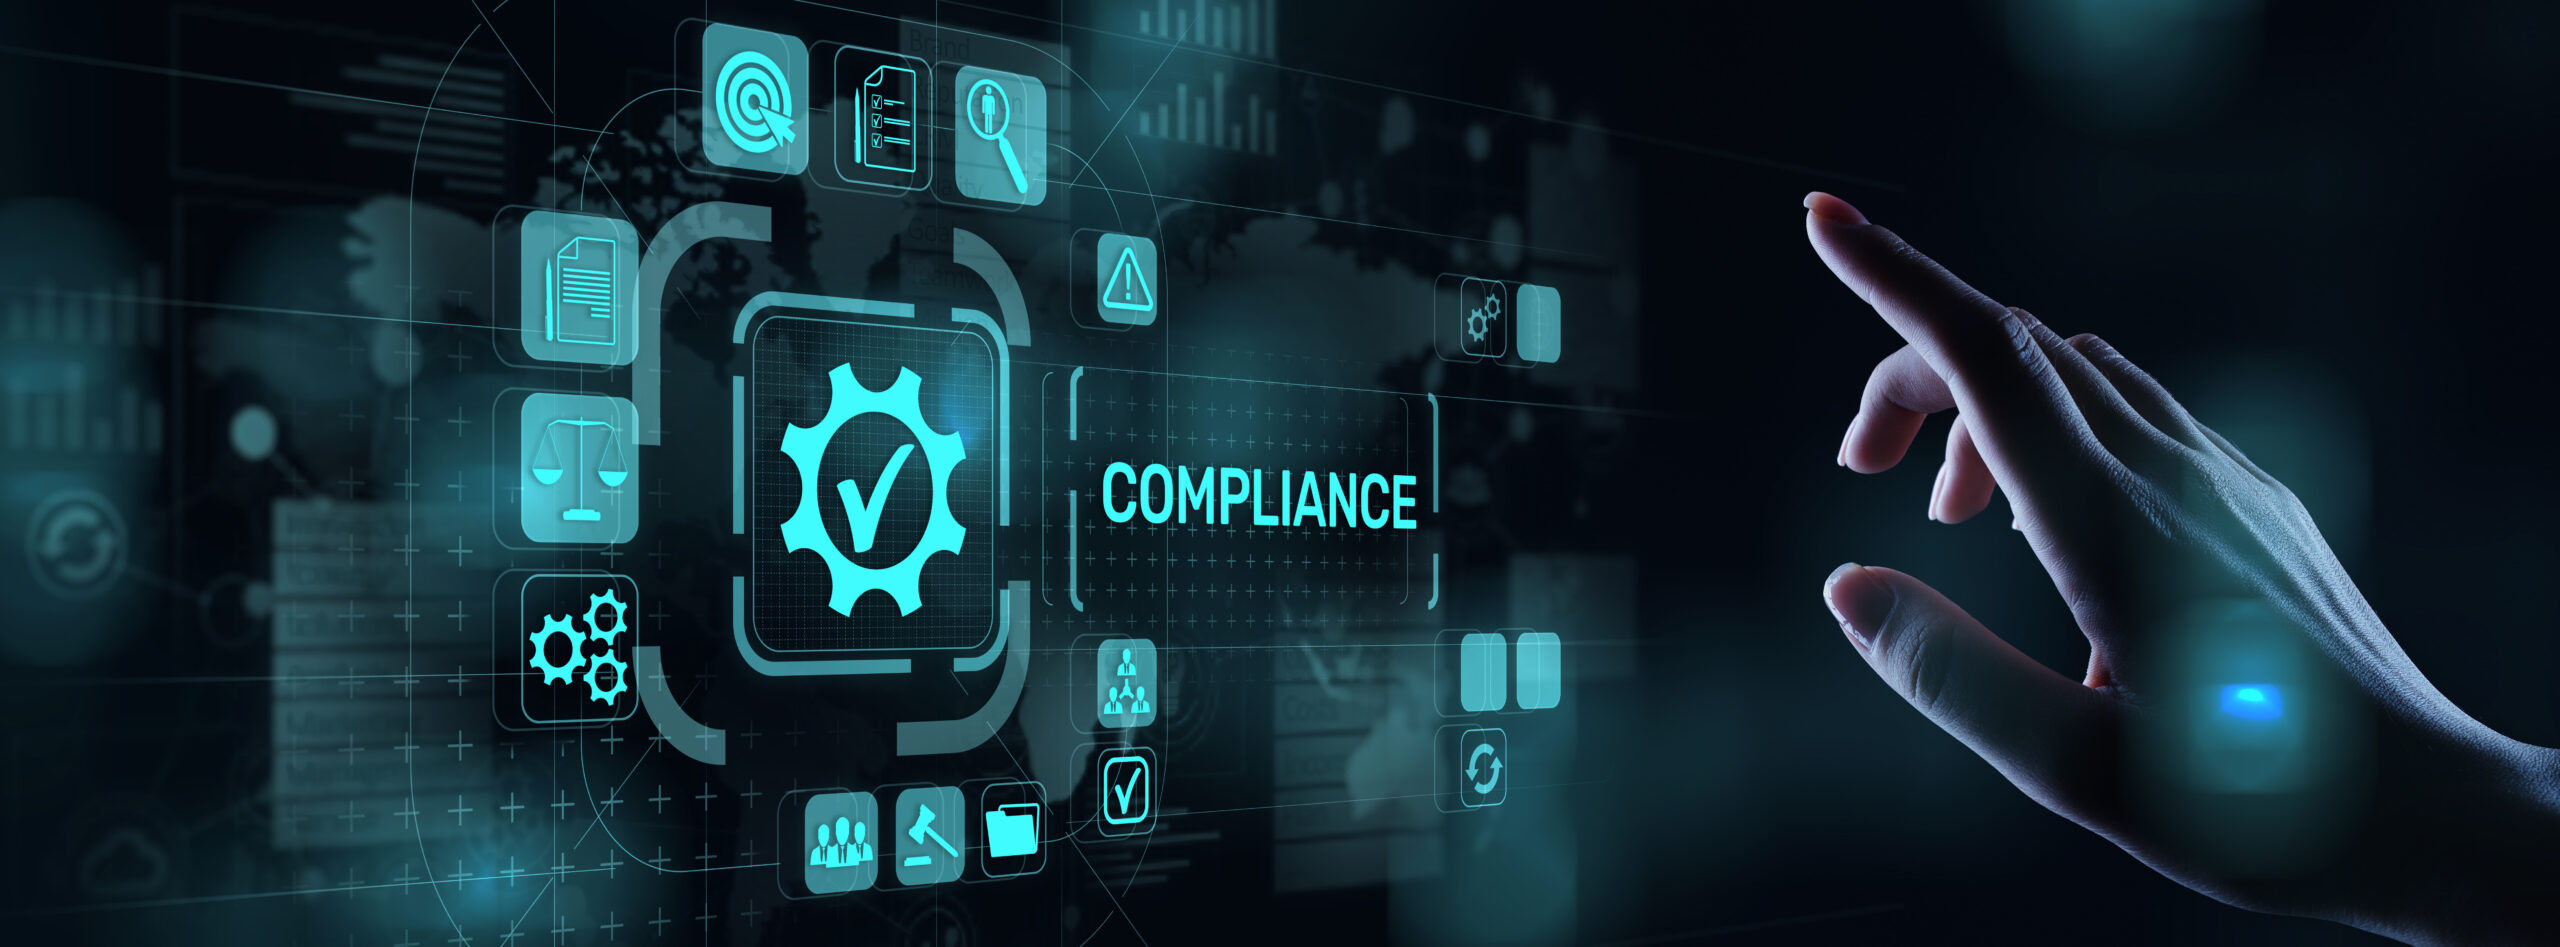 Compliance concept with icons and text. Regulations, law, standards, requirements, audit diagram on virtual screen.